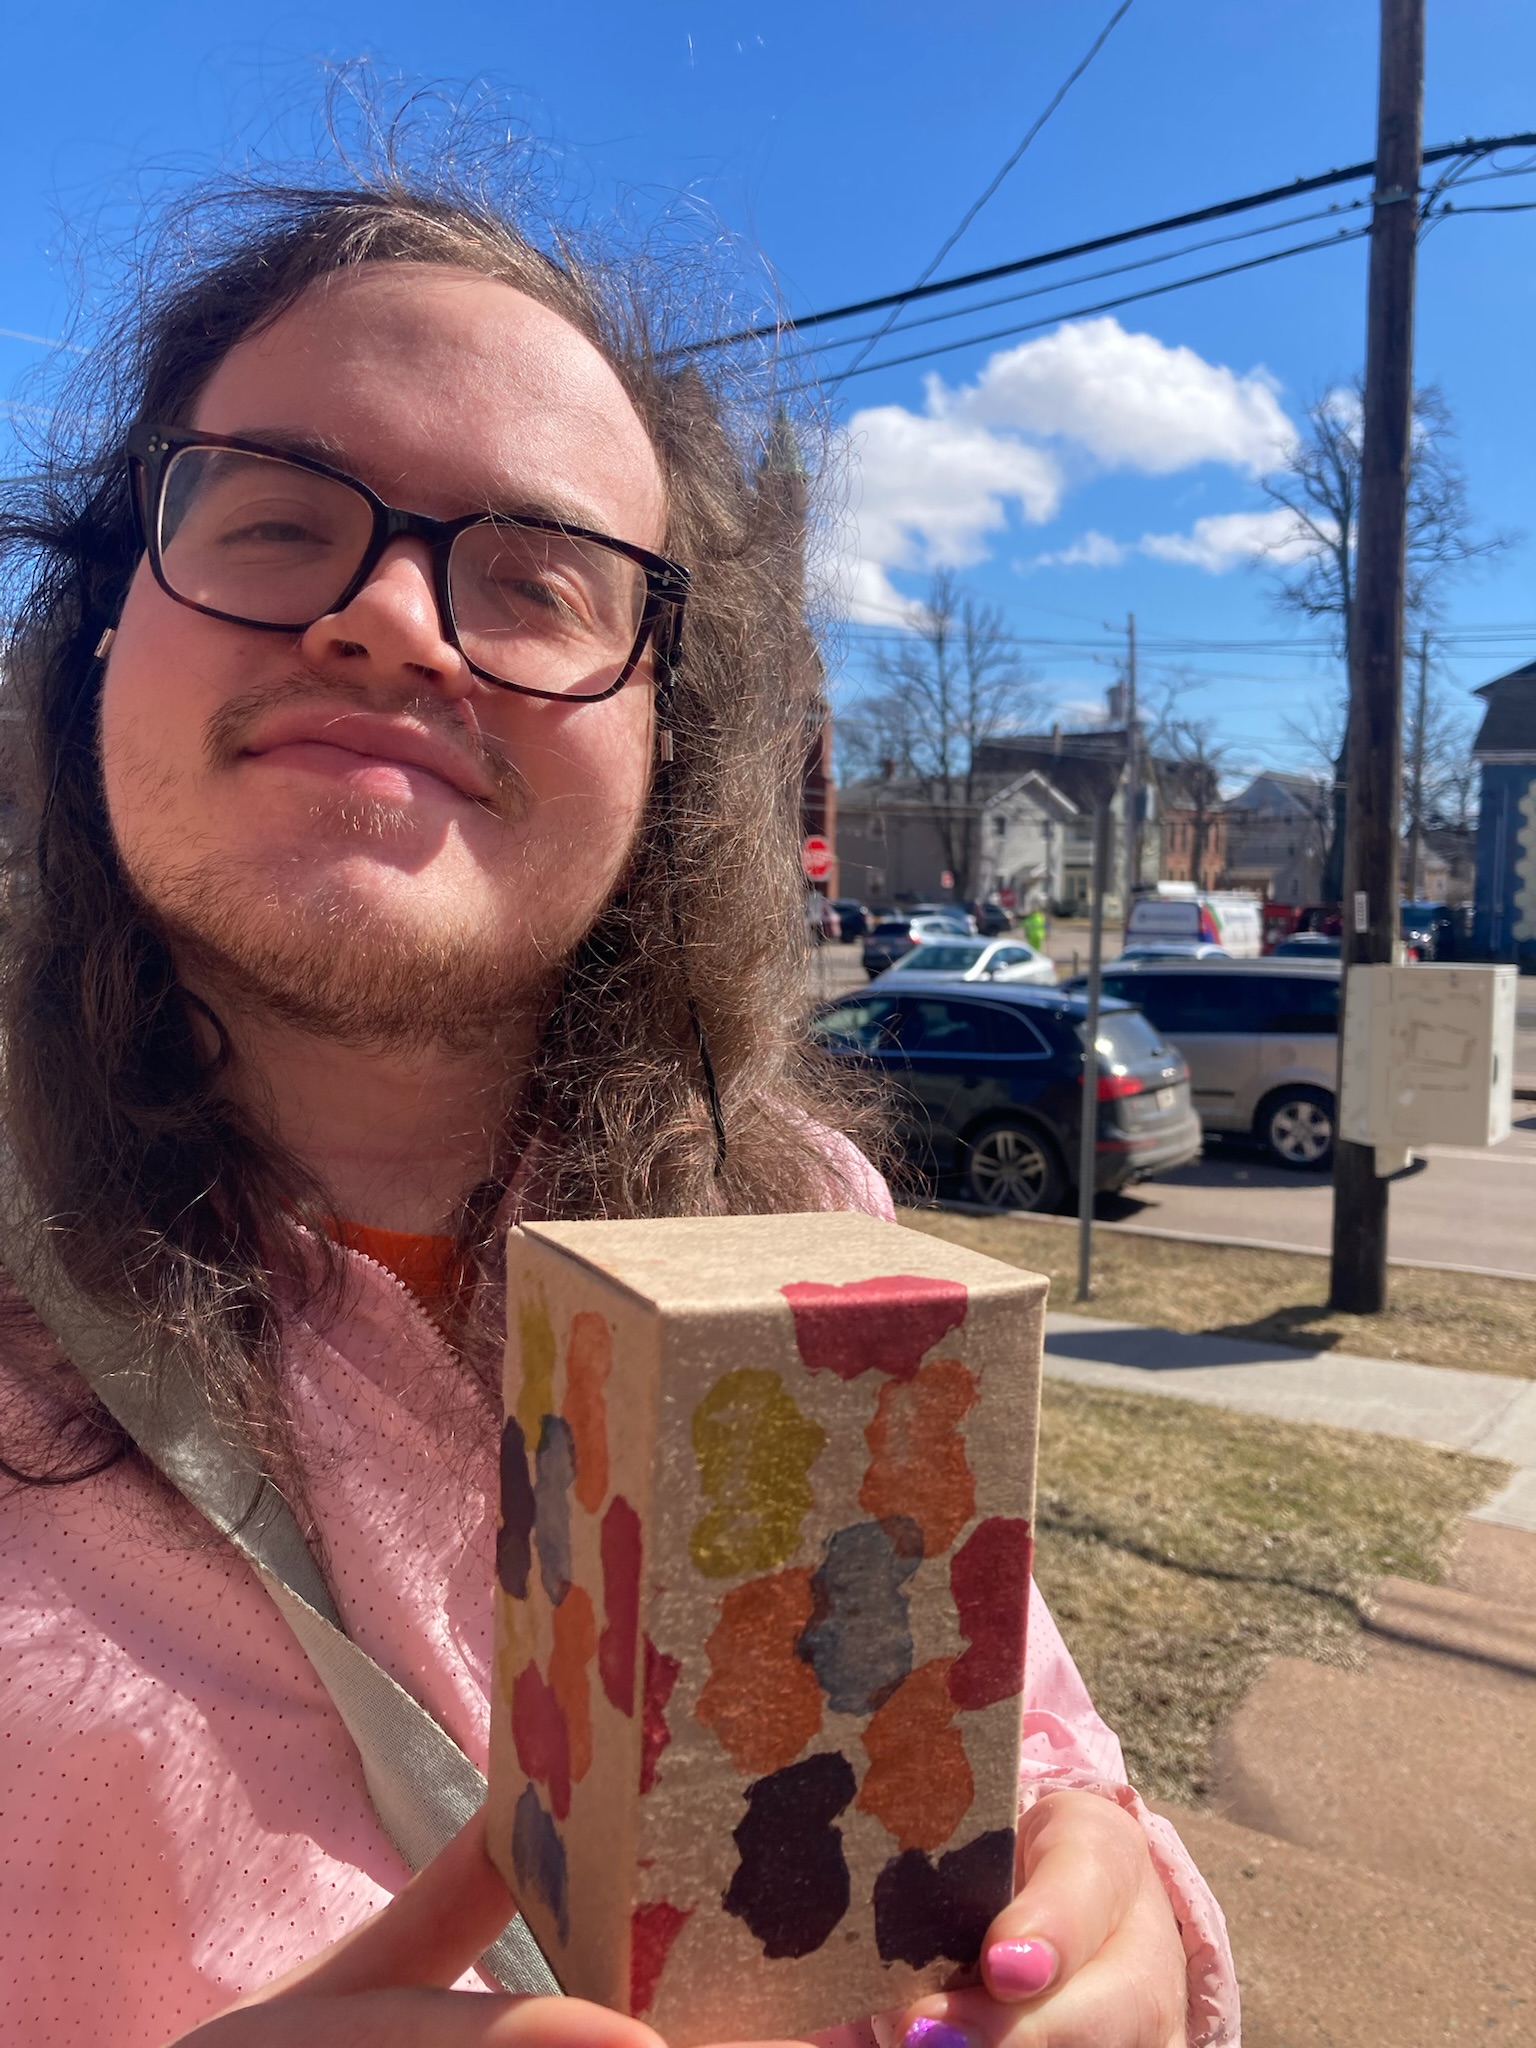 Olivia holding the prototype box in her hand, standing outside on the sidewalk on a bright spring day, wearing a pink windbreaker, with a smile on her face.